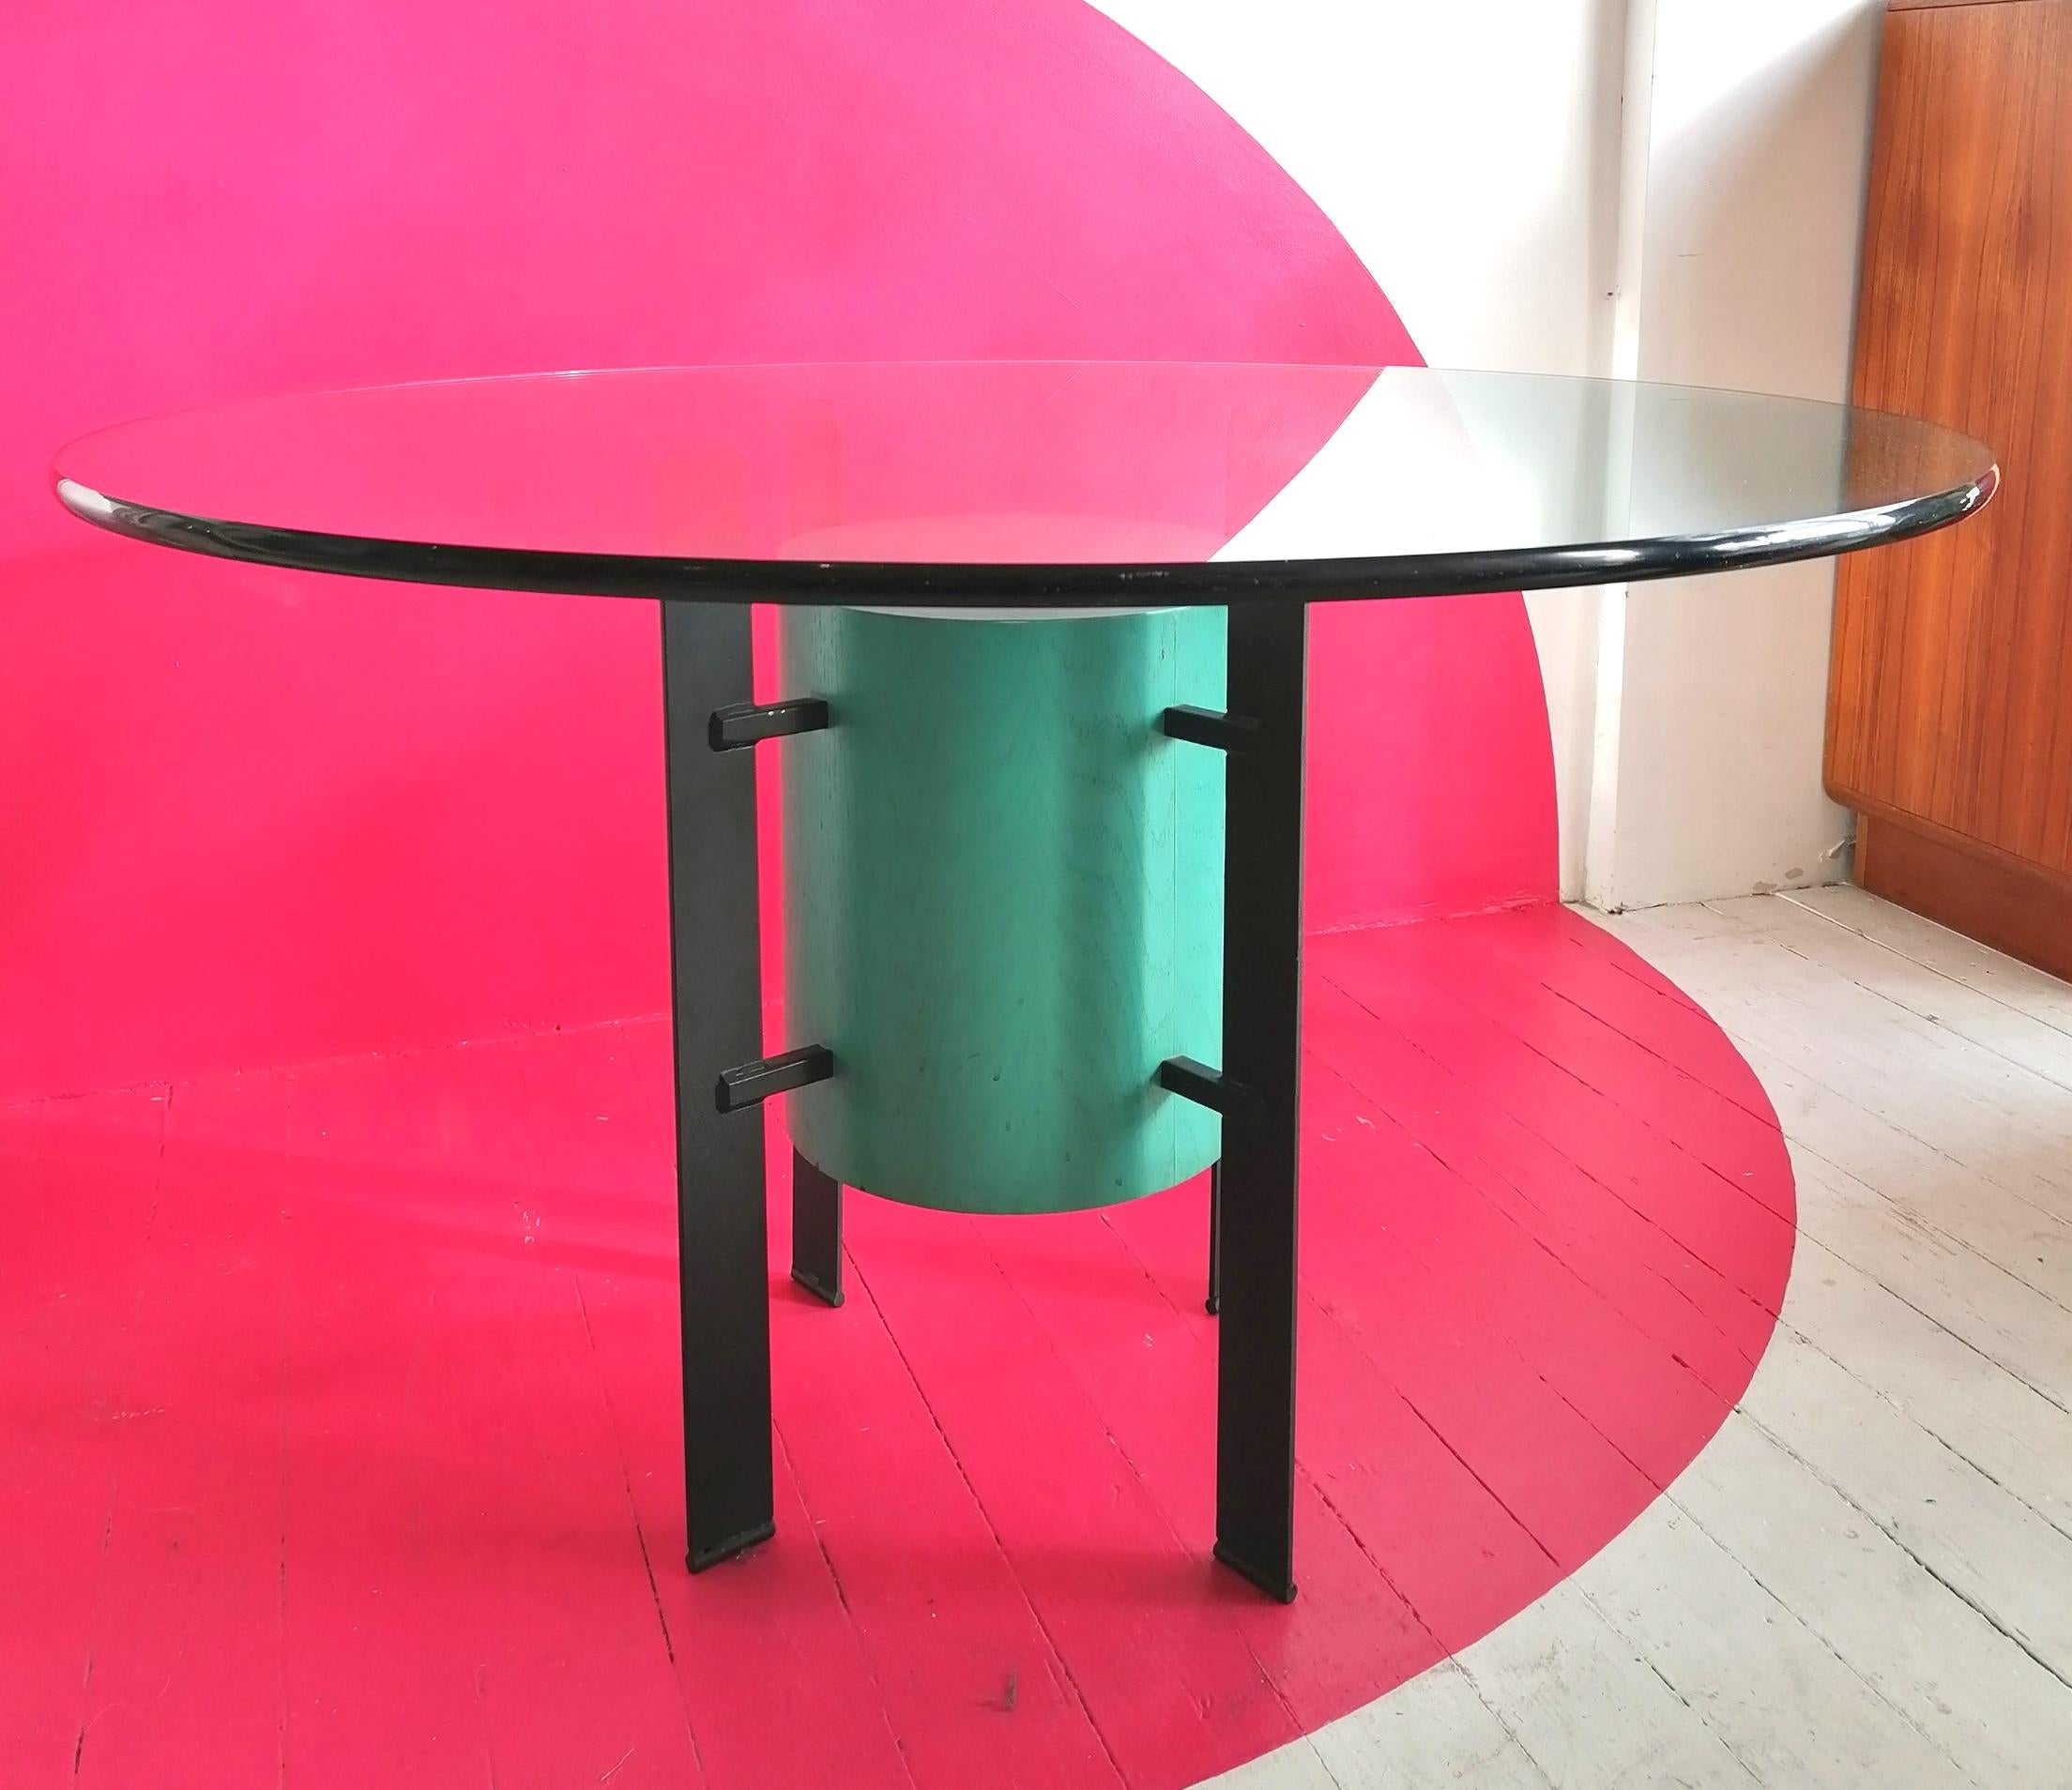 Postmodern Memphis style dining table, USA, 1980s.
Black powder-coated steel or Iron, seafoam-coloured plywood centre, 20mm thick glass top.

 

Dimensions : diameter 122cm, height 74.5cm